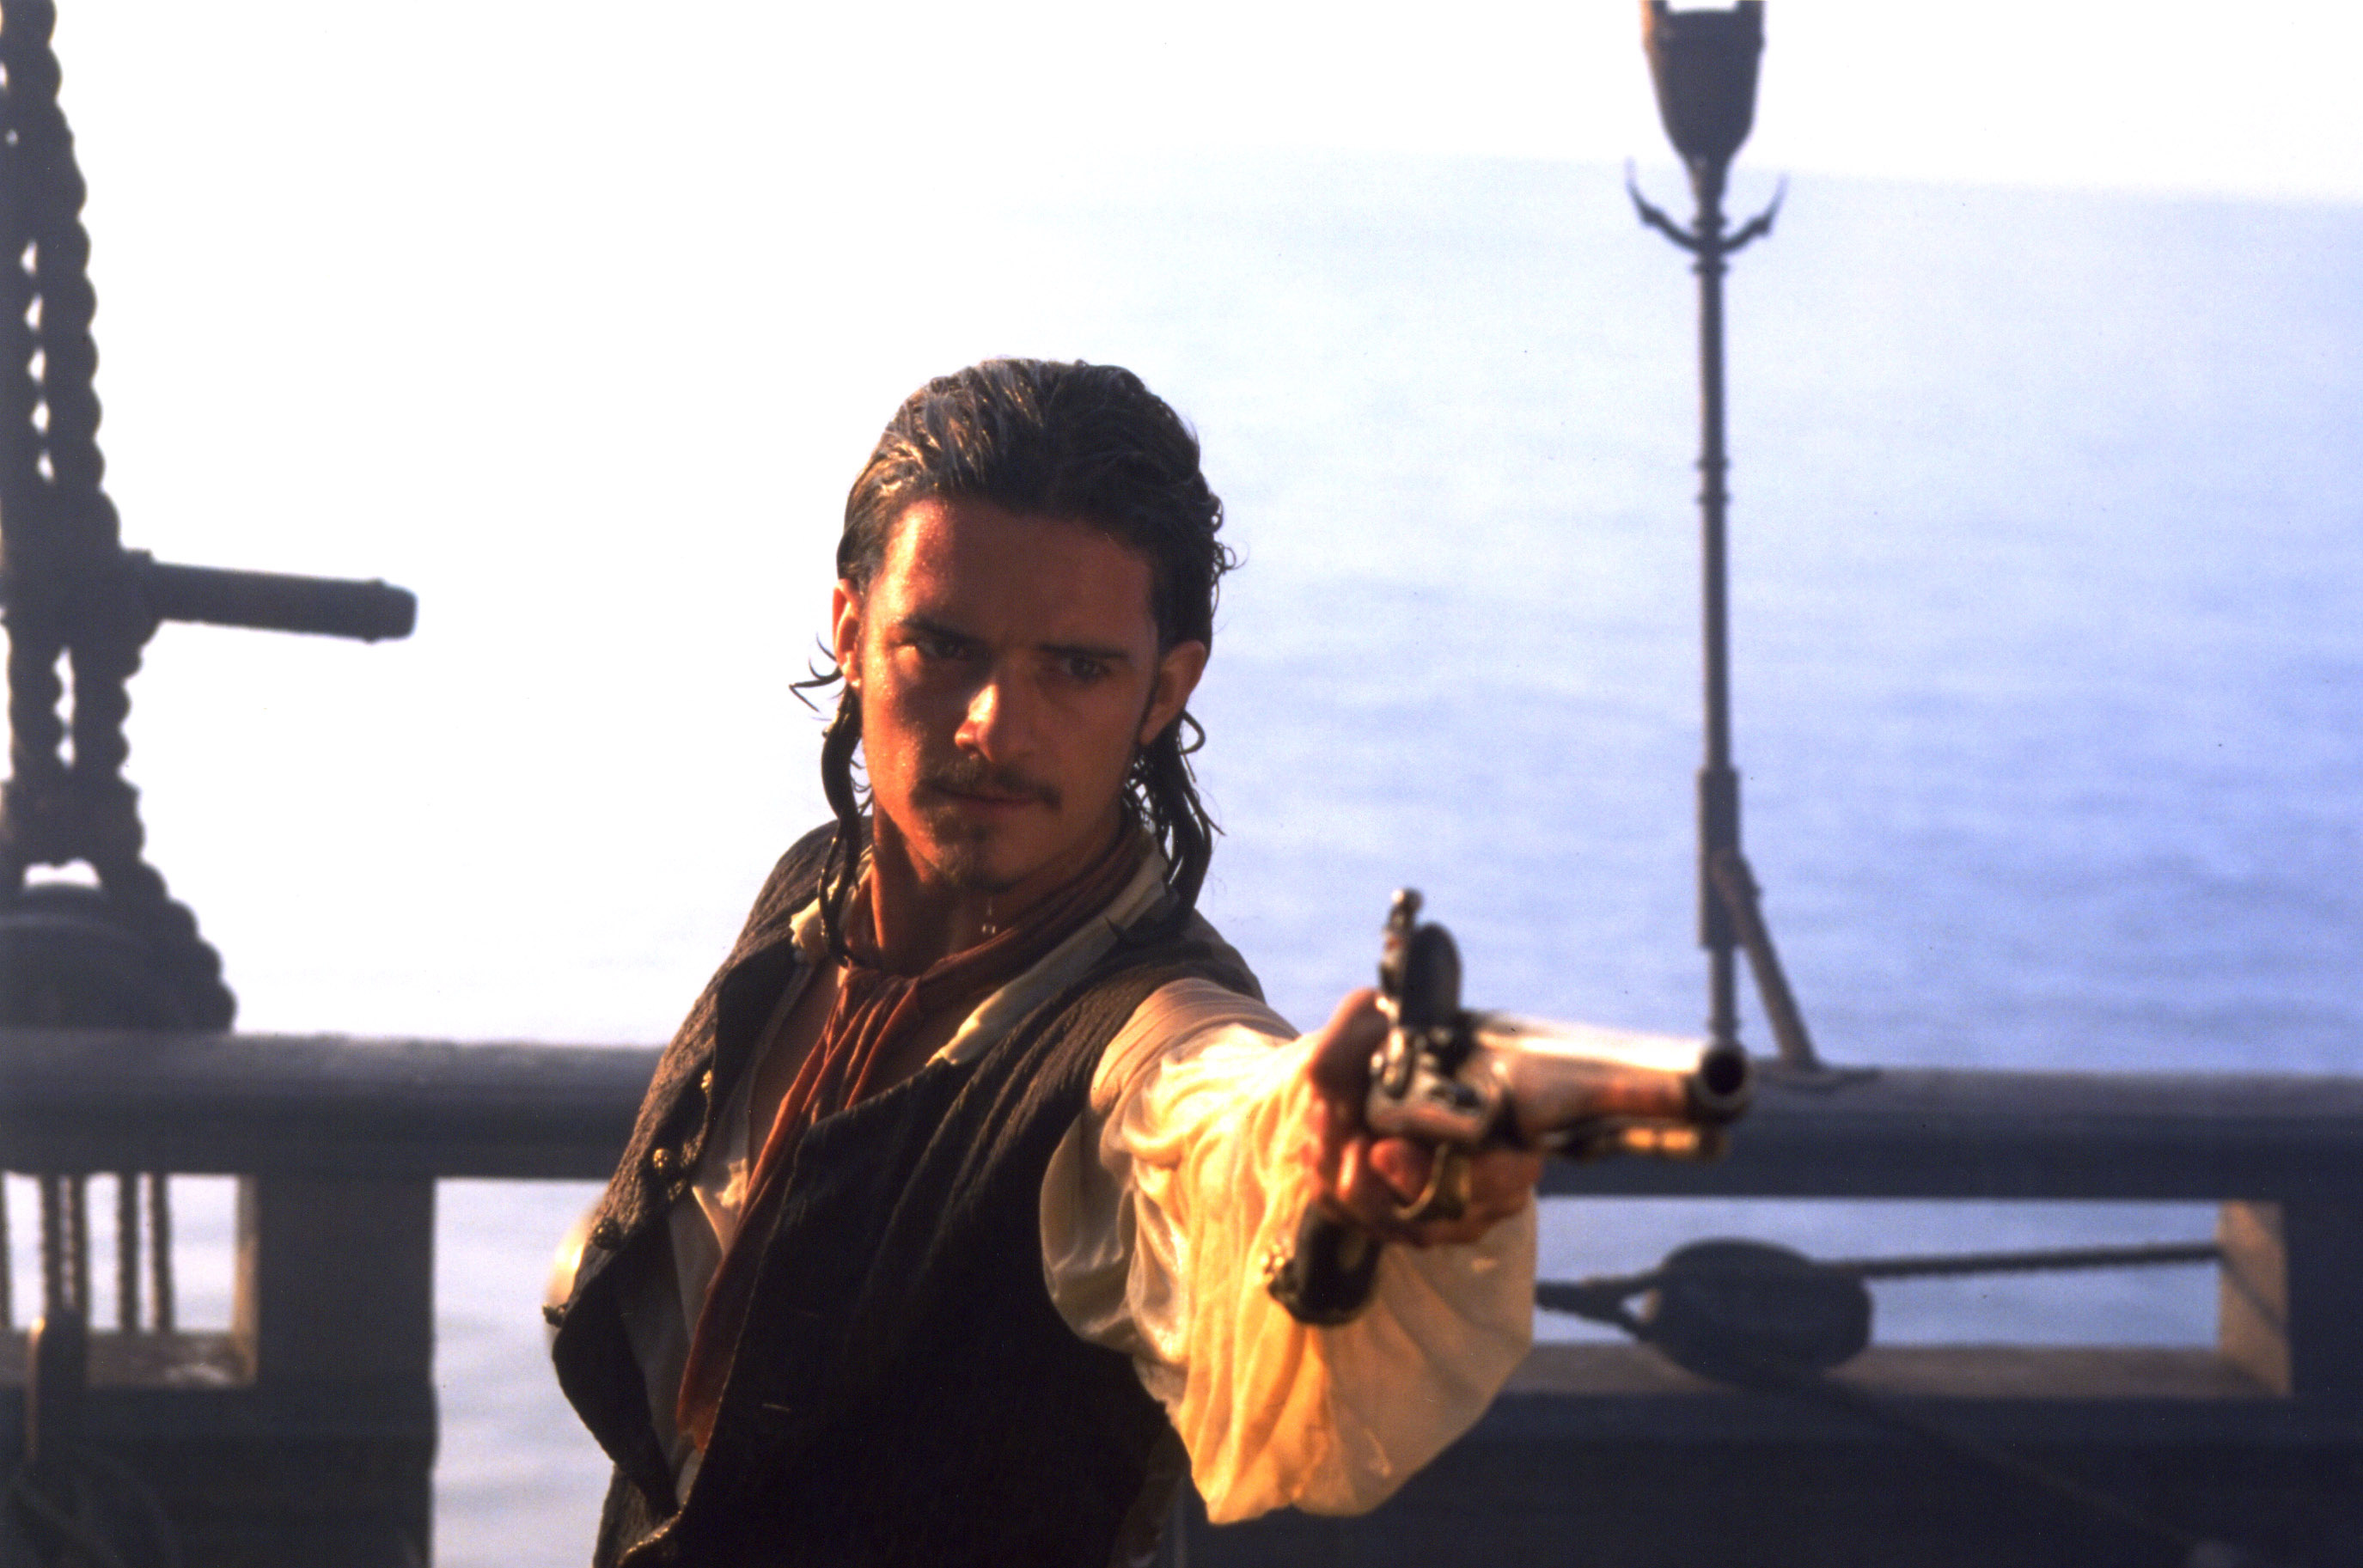 Will Turner, Pirates of the Caribbean, The Curse of the Black Pearl, HD wallpaper, 2750x1830 HD Desktop